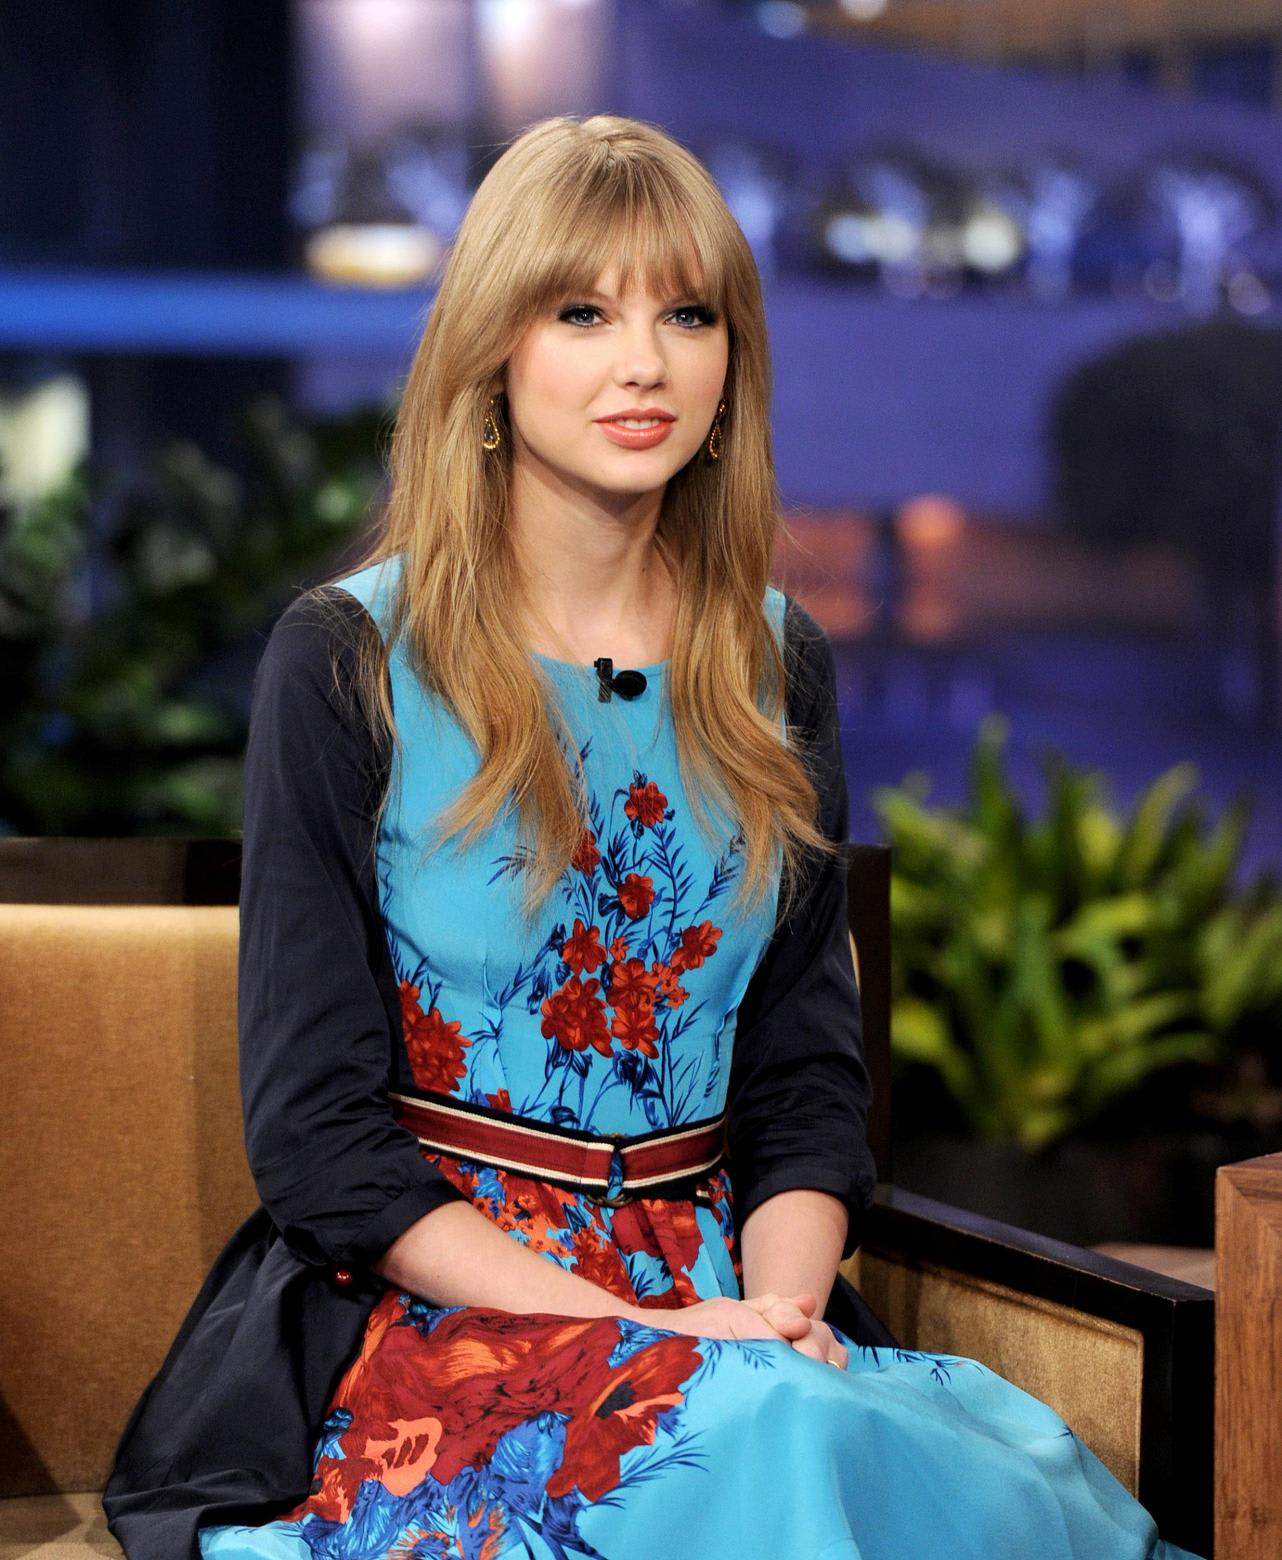 Taylor Swift visits The Tonight Show with Jay Leno 20 Feb 2012 - ☆Favorite Celebrity ...1282 x 1560